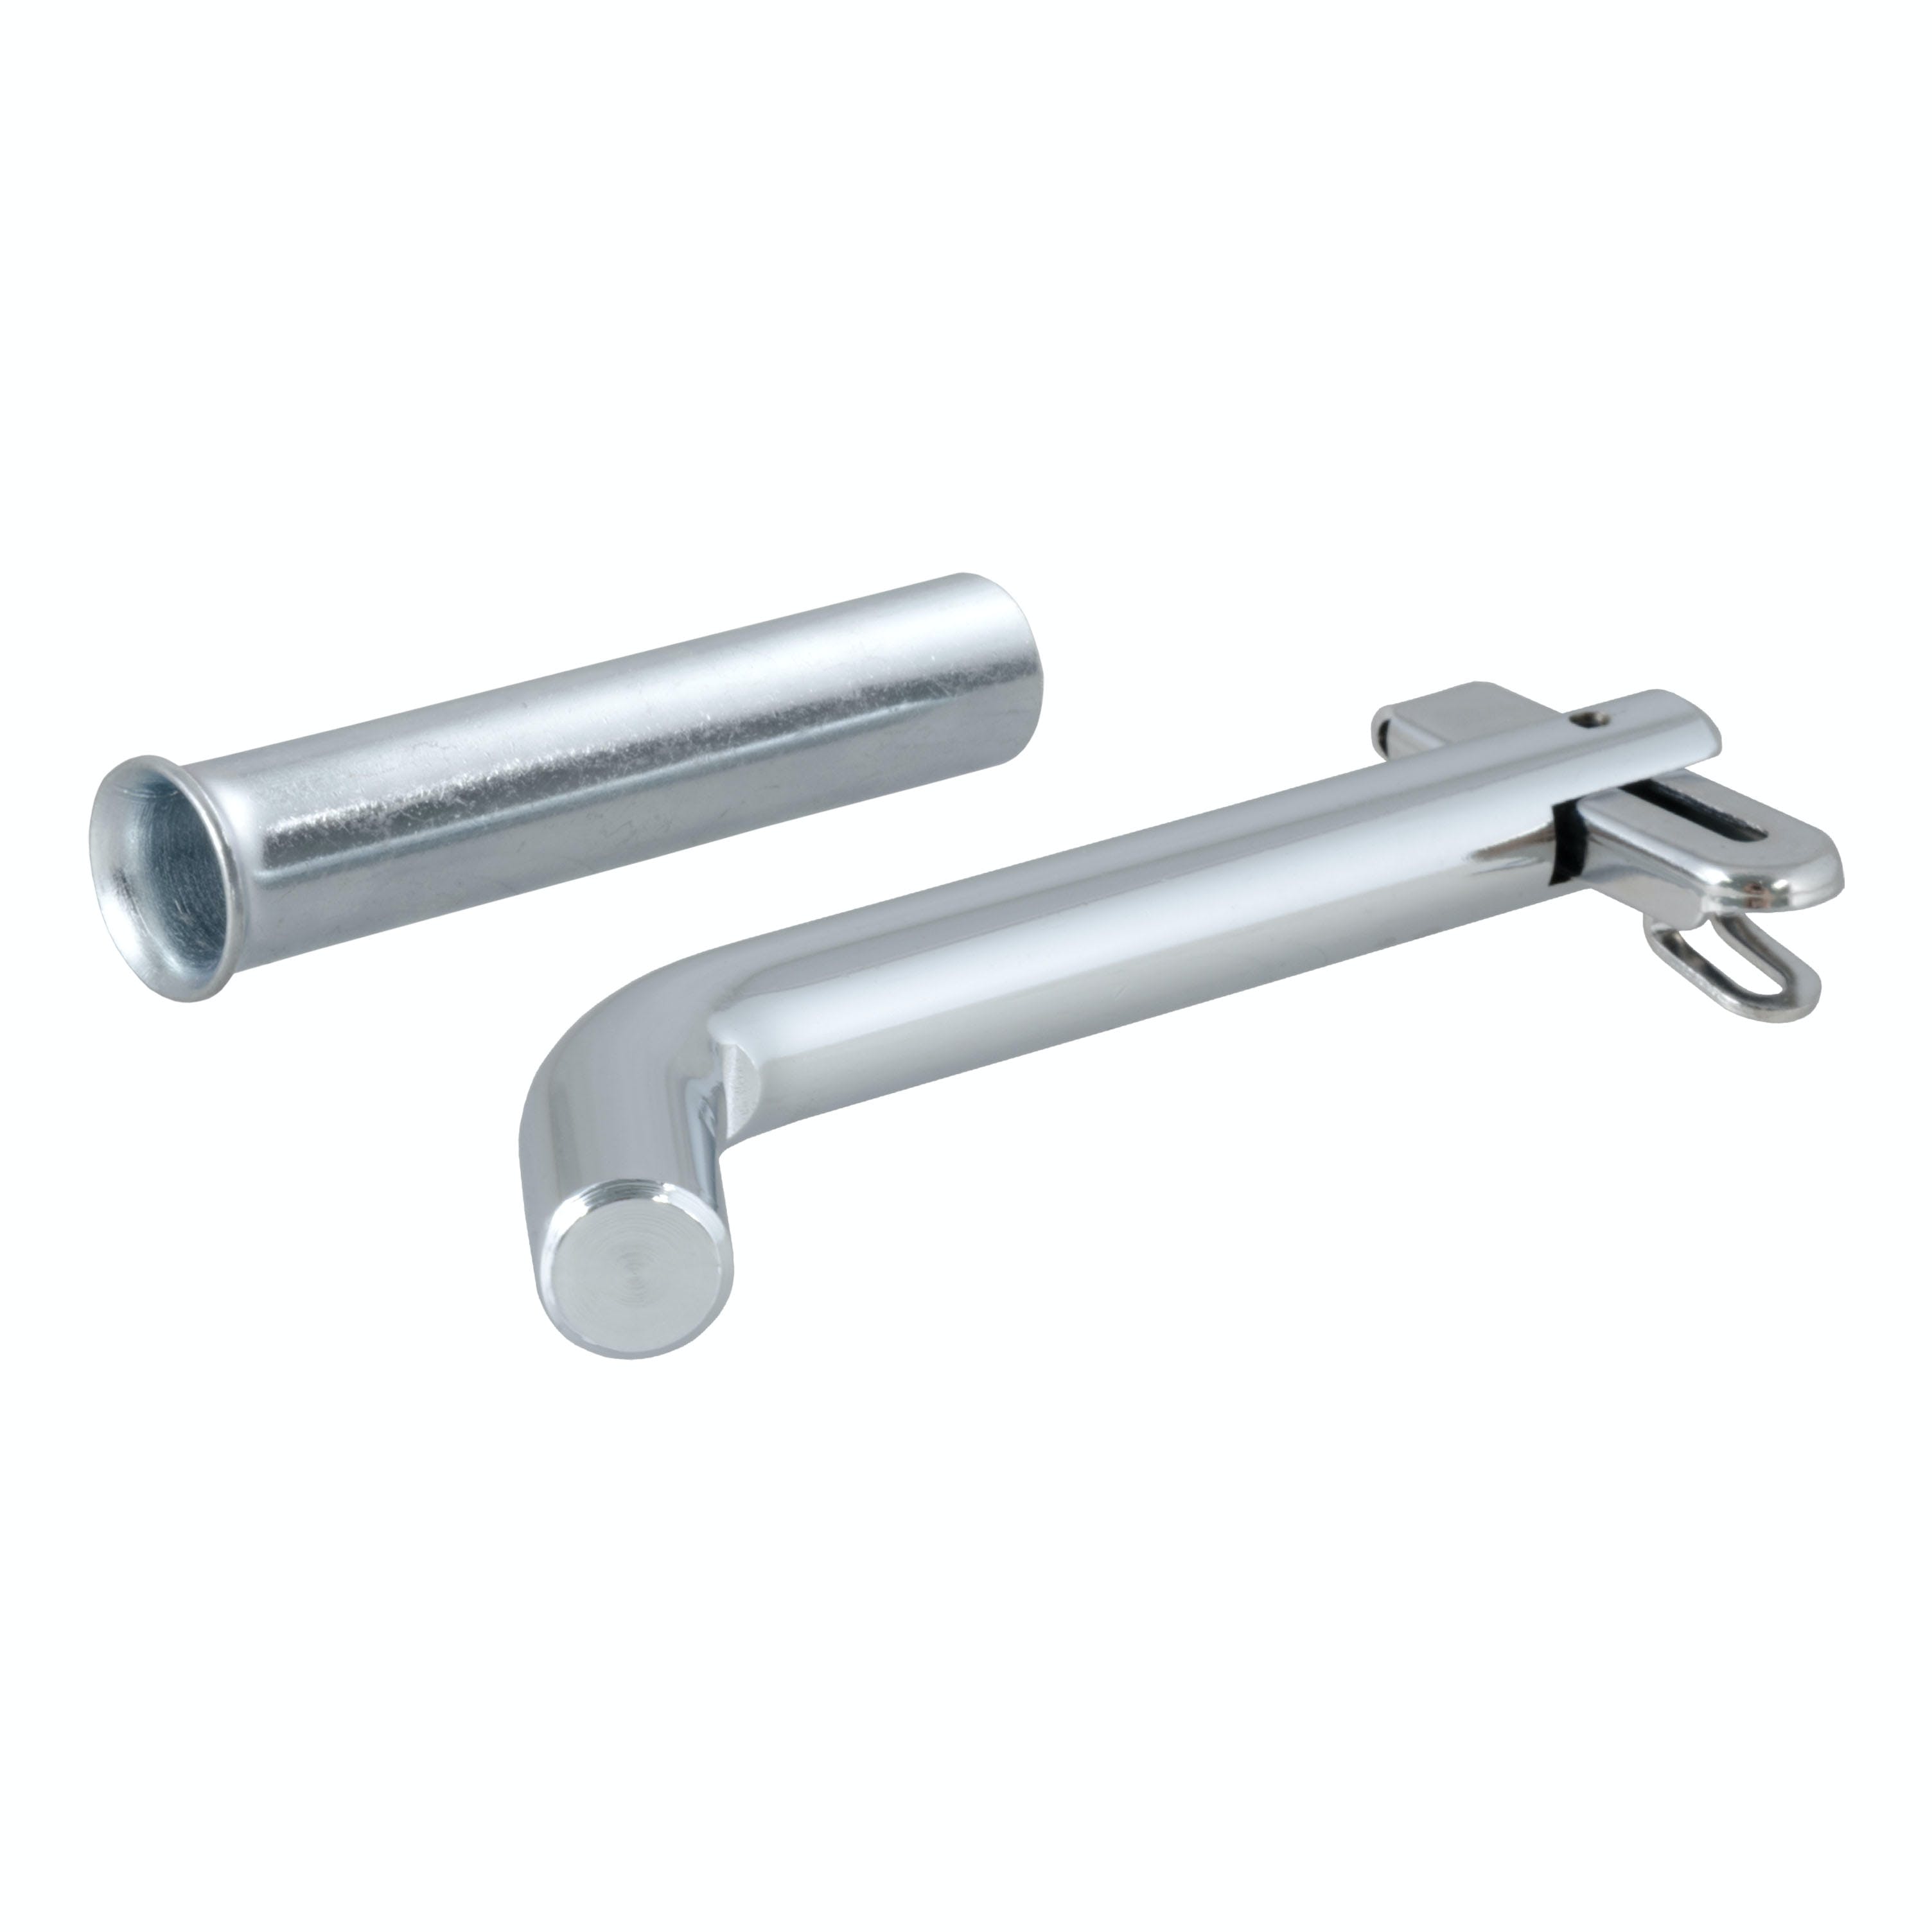 CURT 21561 1/2 Swivel Hitch Pin with 5/8 Adapter (1-1/4 or 2 Receiver, Zinc, Packaged)